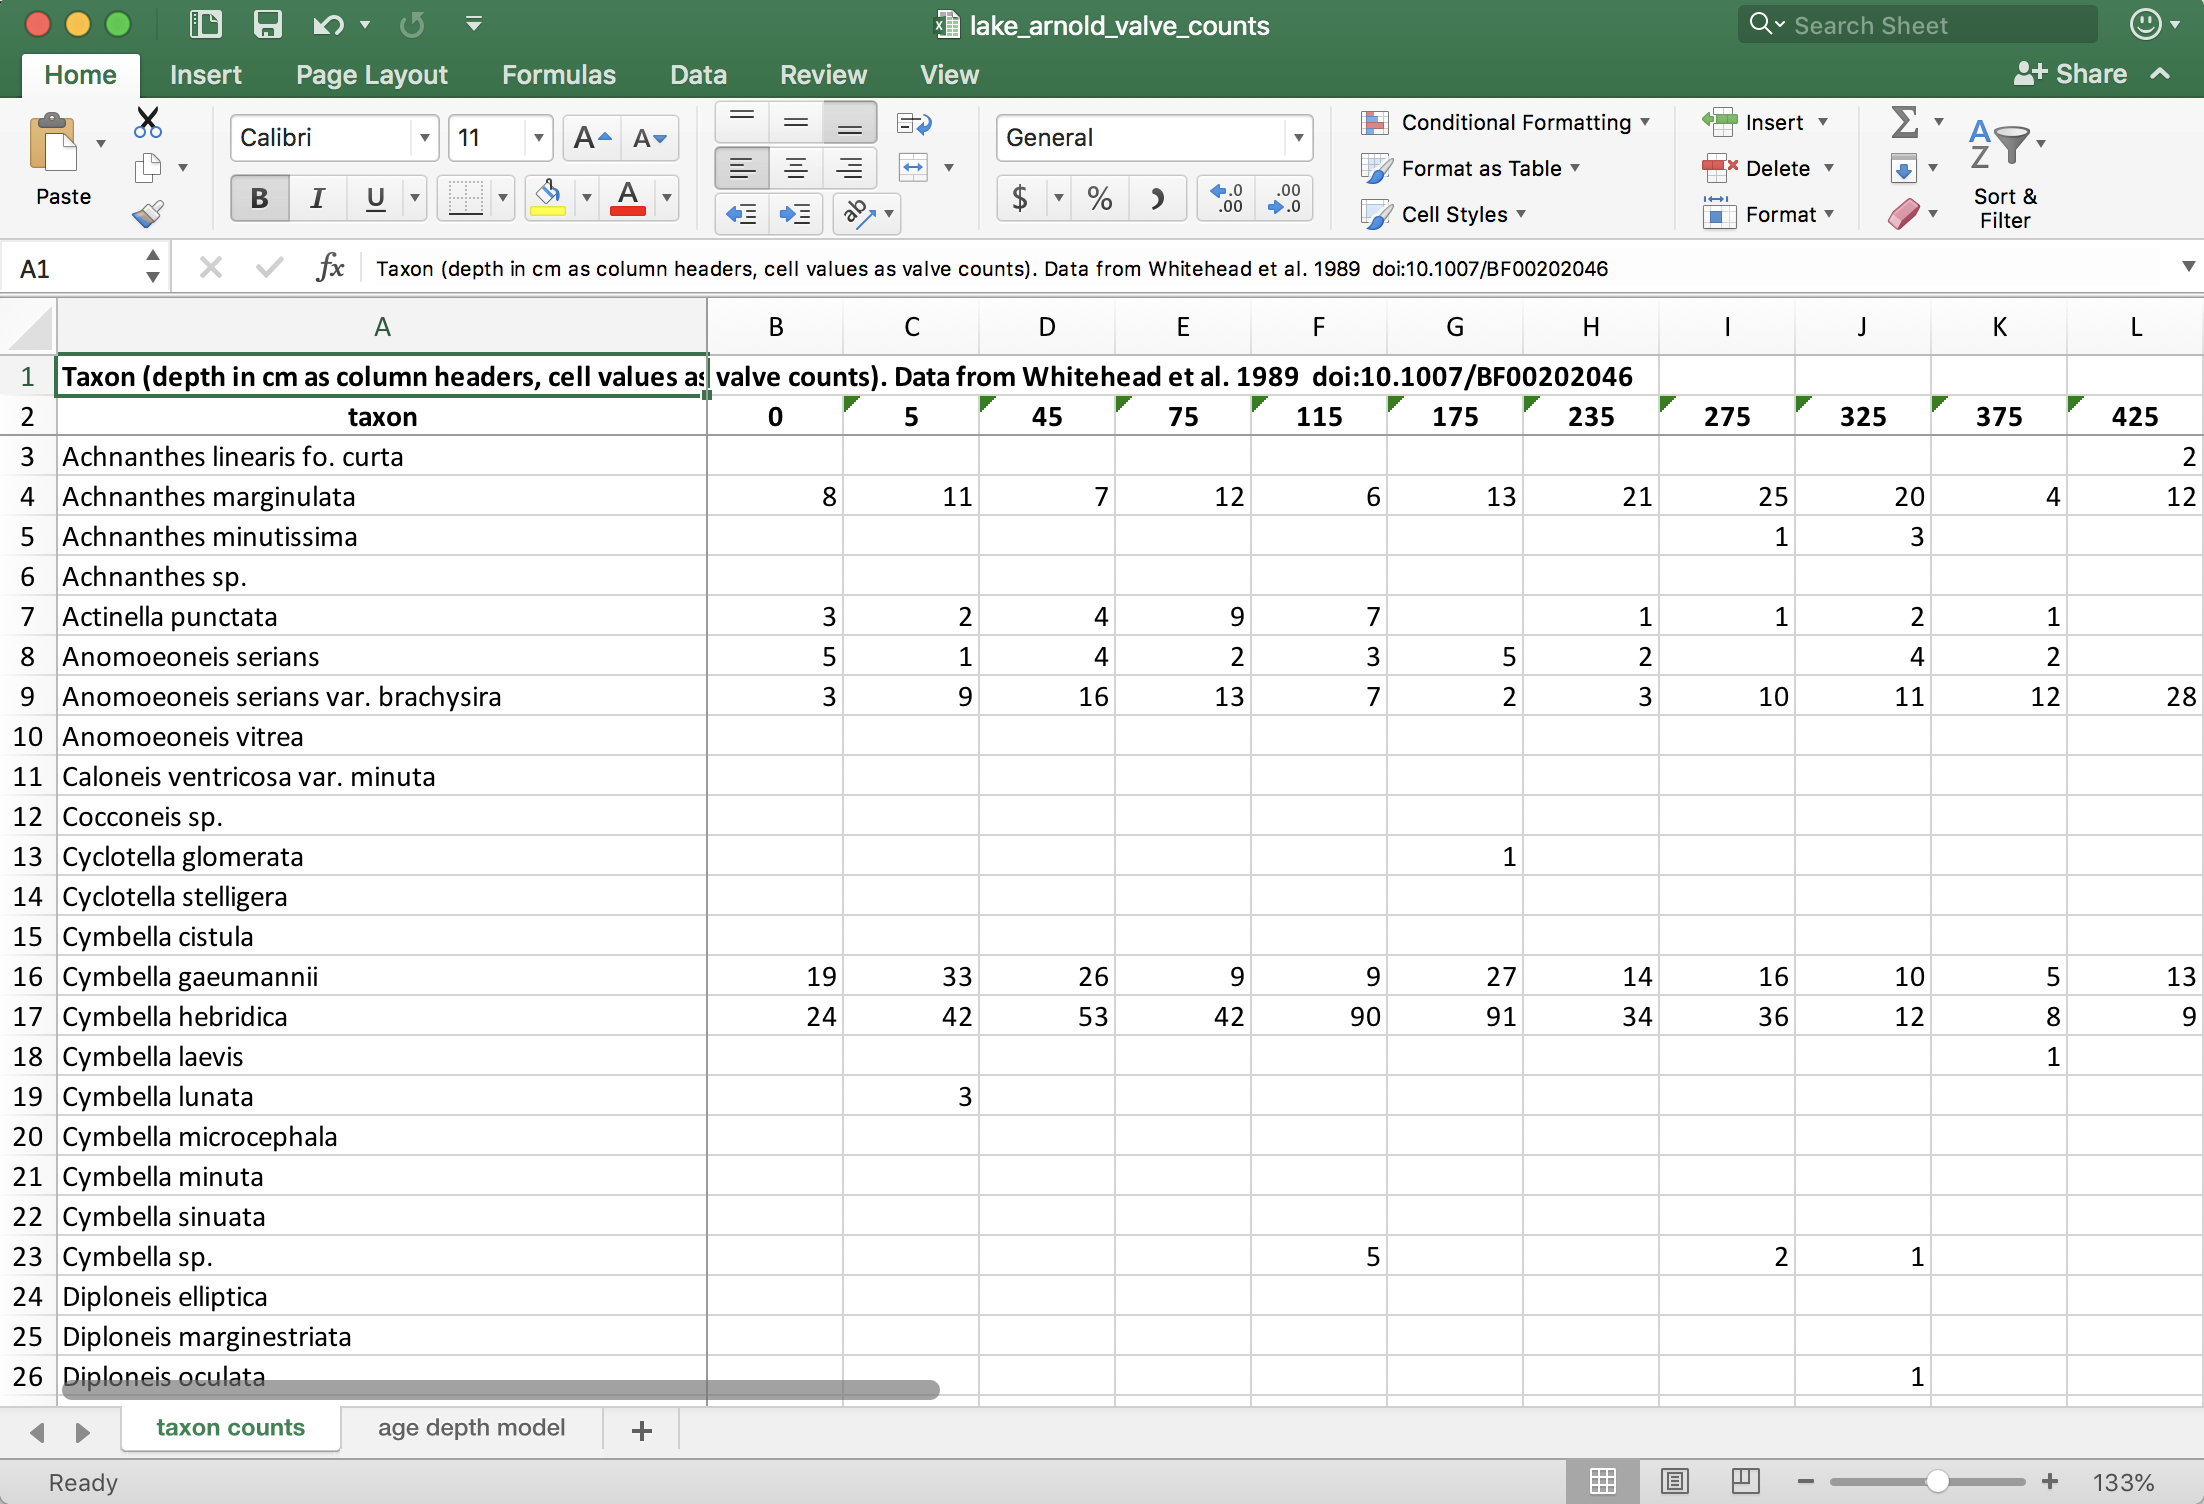 Excel screenshot of the Lake Arnold data. The format of one row per taxon with one column per sample is one way that these data are organized in the wild.